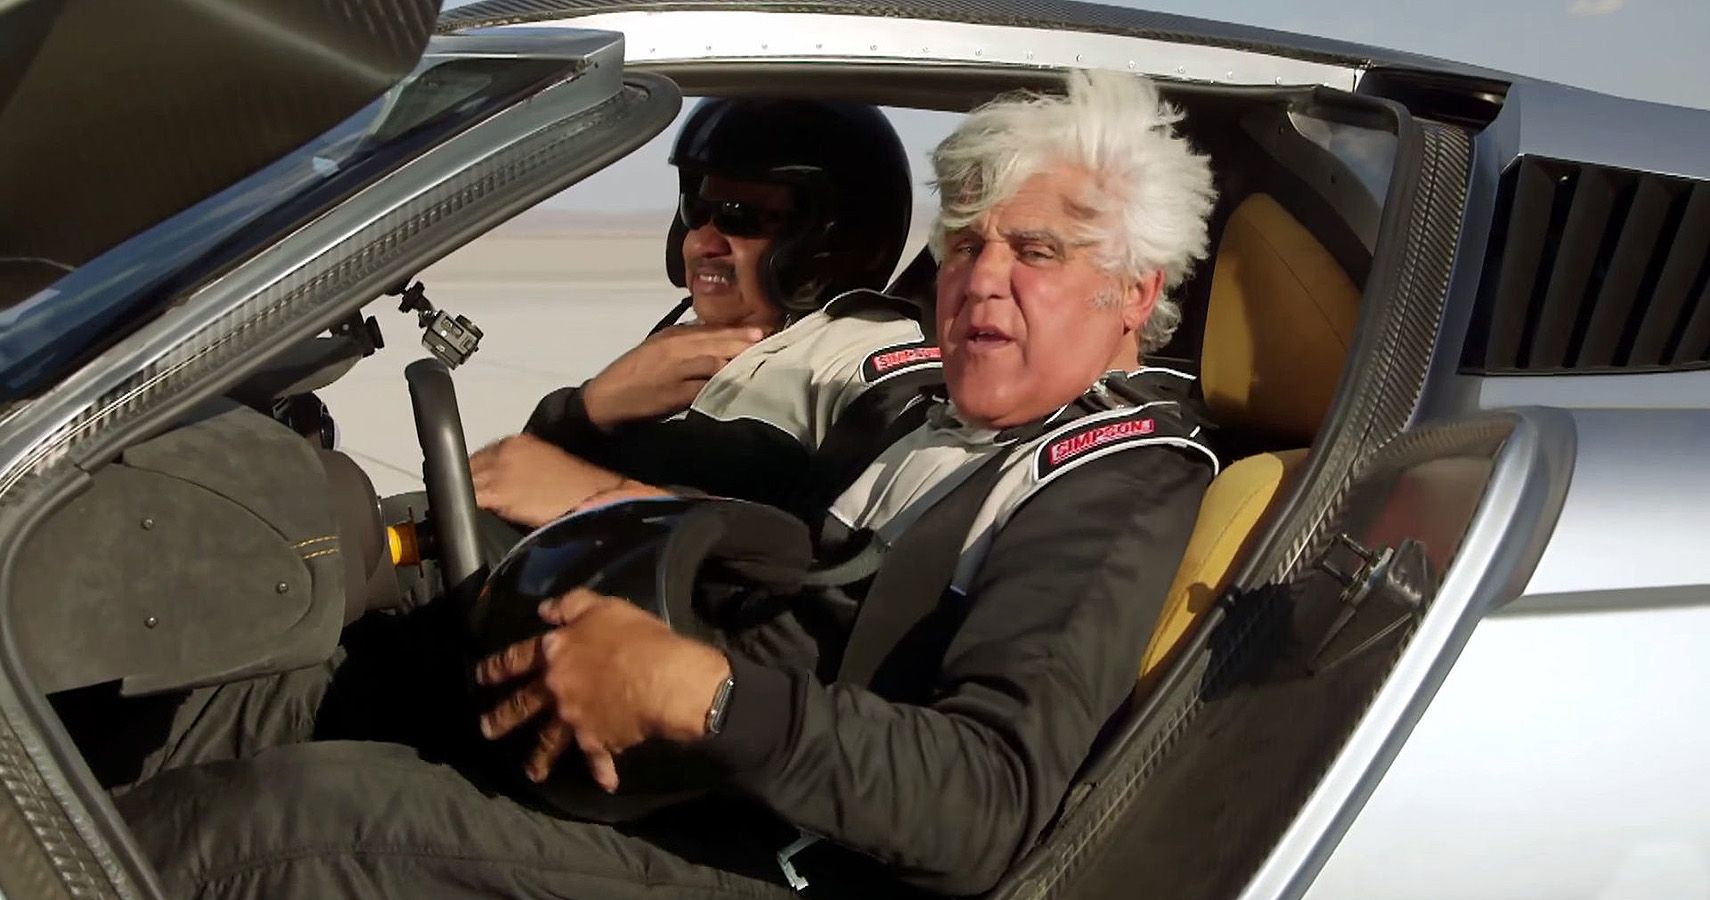 We Doubt Jay Leno’s Collection Can Be Rivaled By Another, Considering The Kind Of Unique Cars He Has